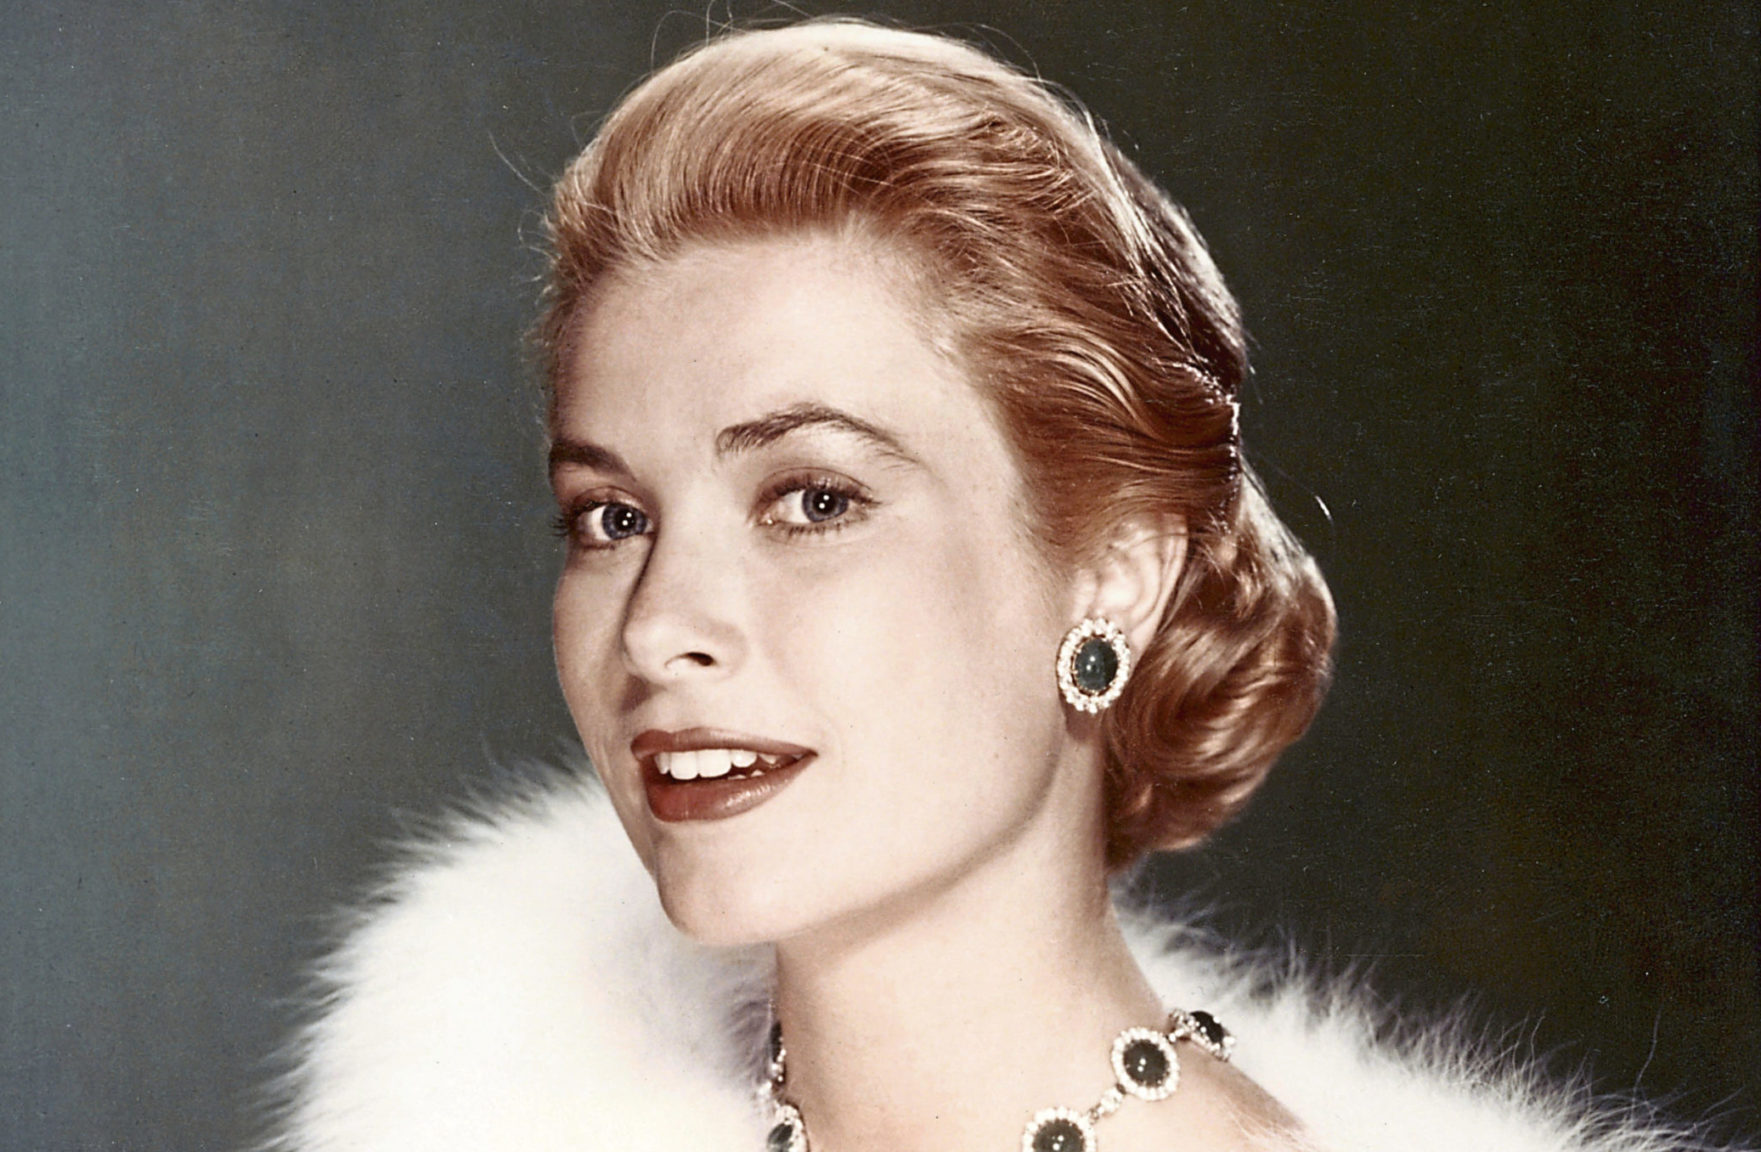 On This Day September 14 1982 The World Lost Grace Kelly A